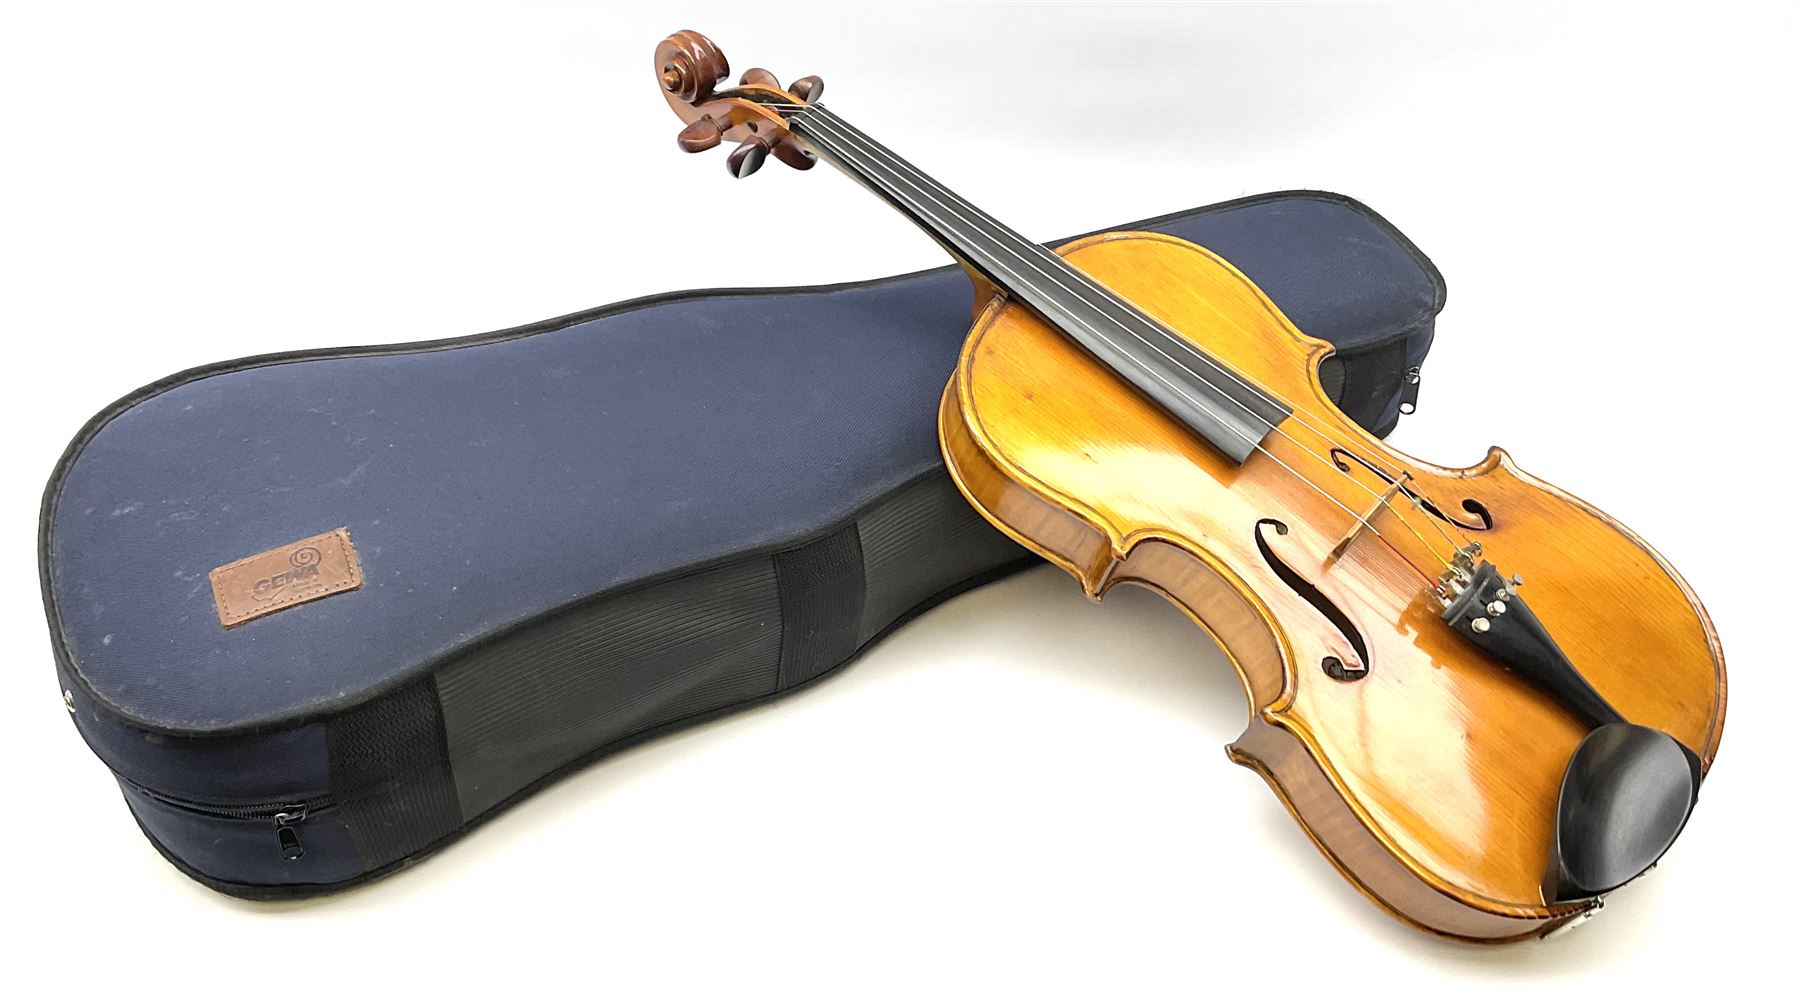 1920s continental large viola with 42cm two-piece maple back and ribs and wide grain sprucewood top